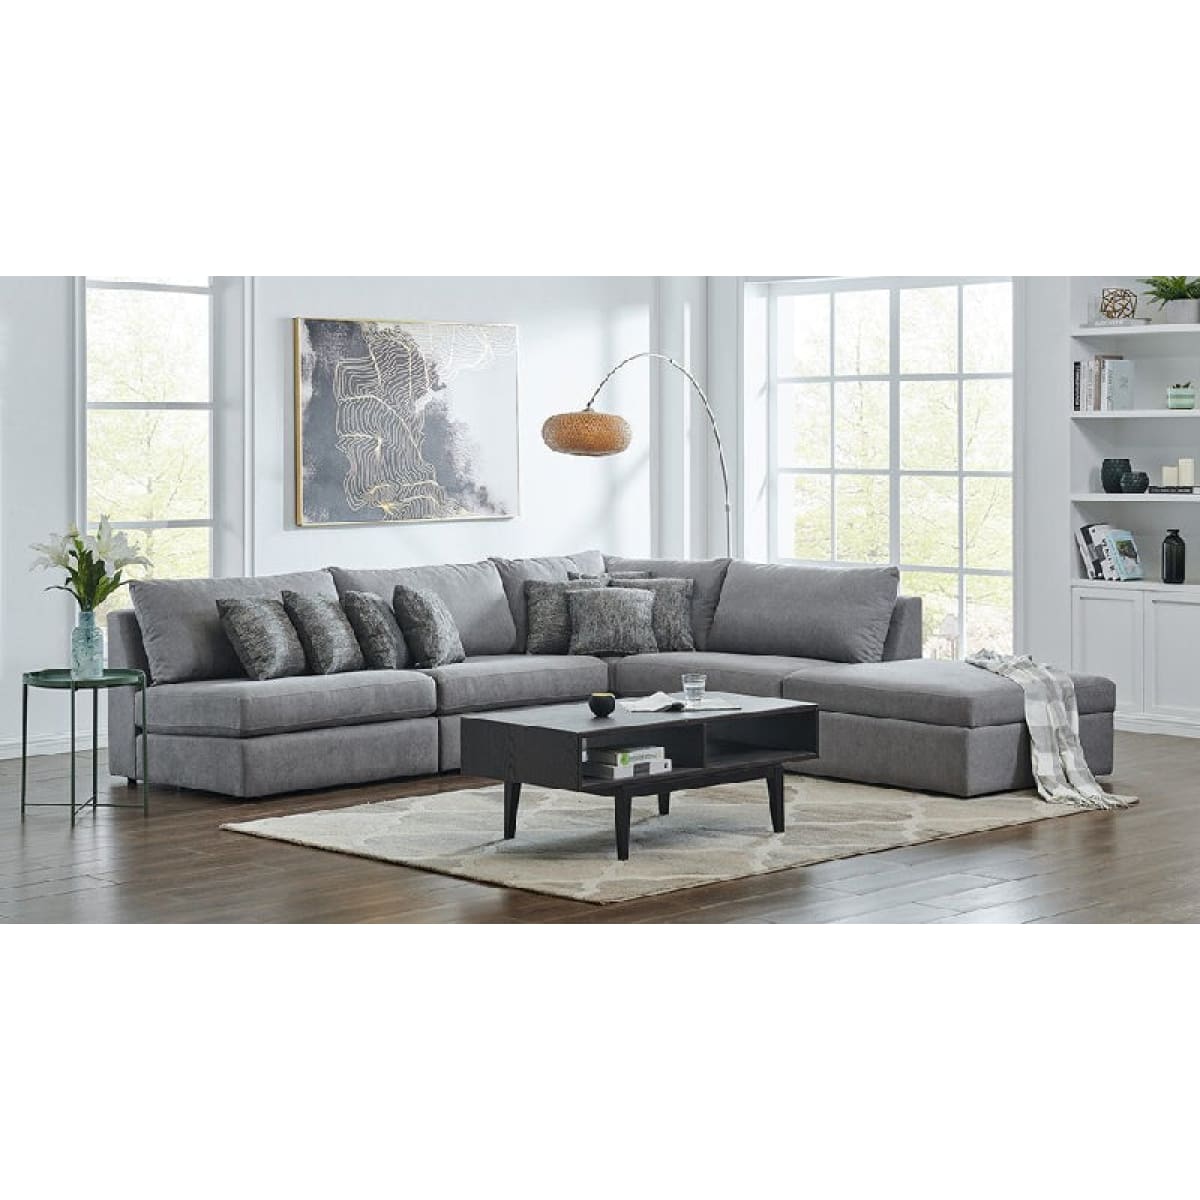 Chessa Sectional - Sectional